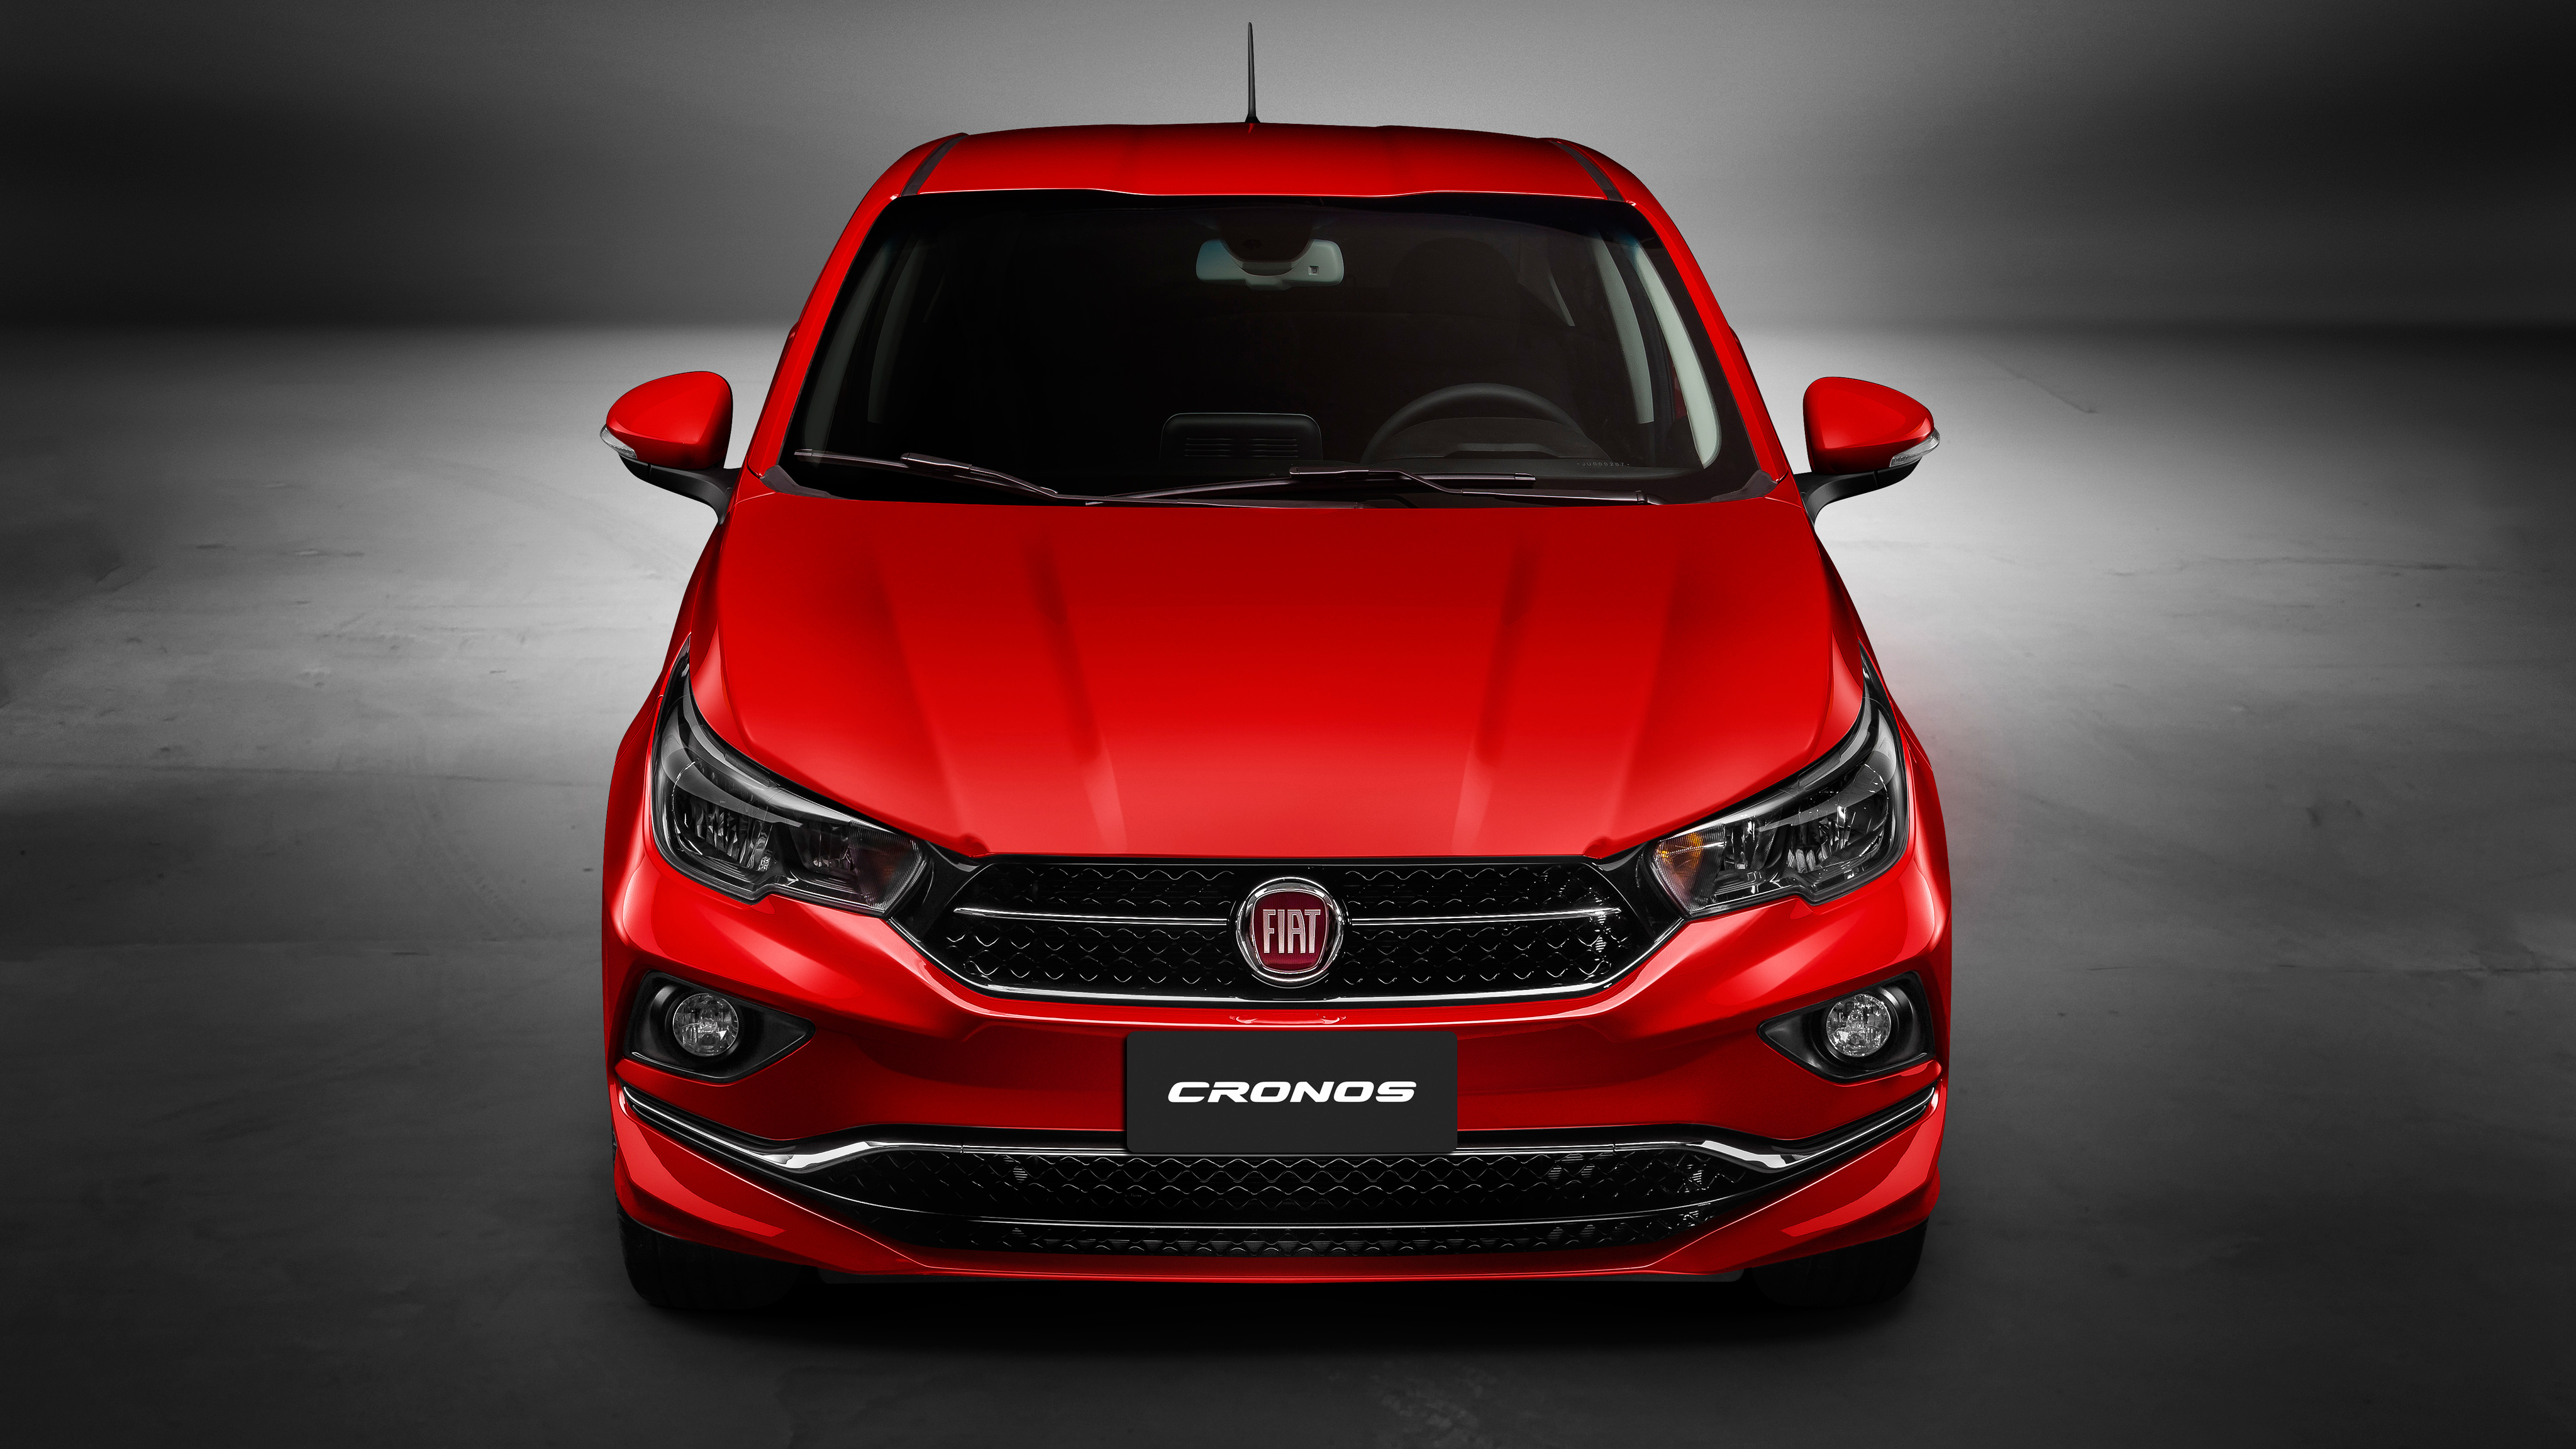 Red Car Fiat Cronos Front Wallpaper And Image